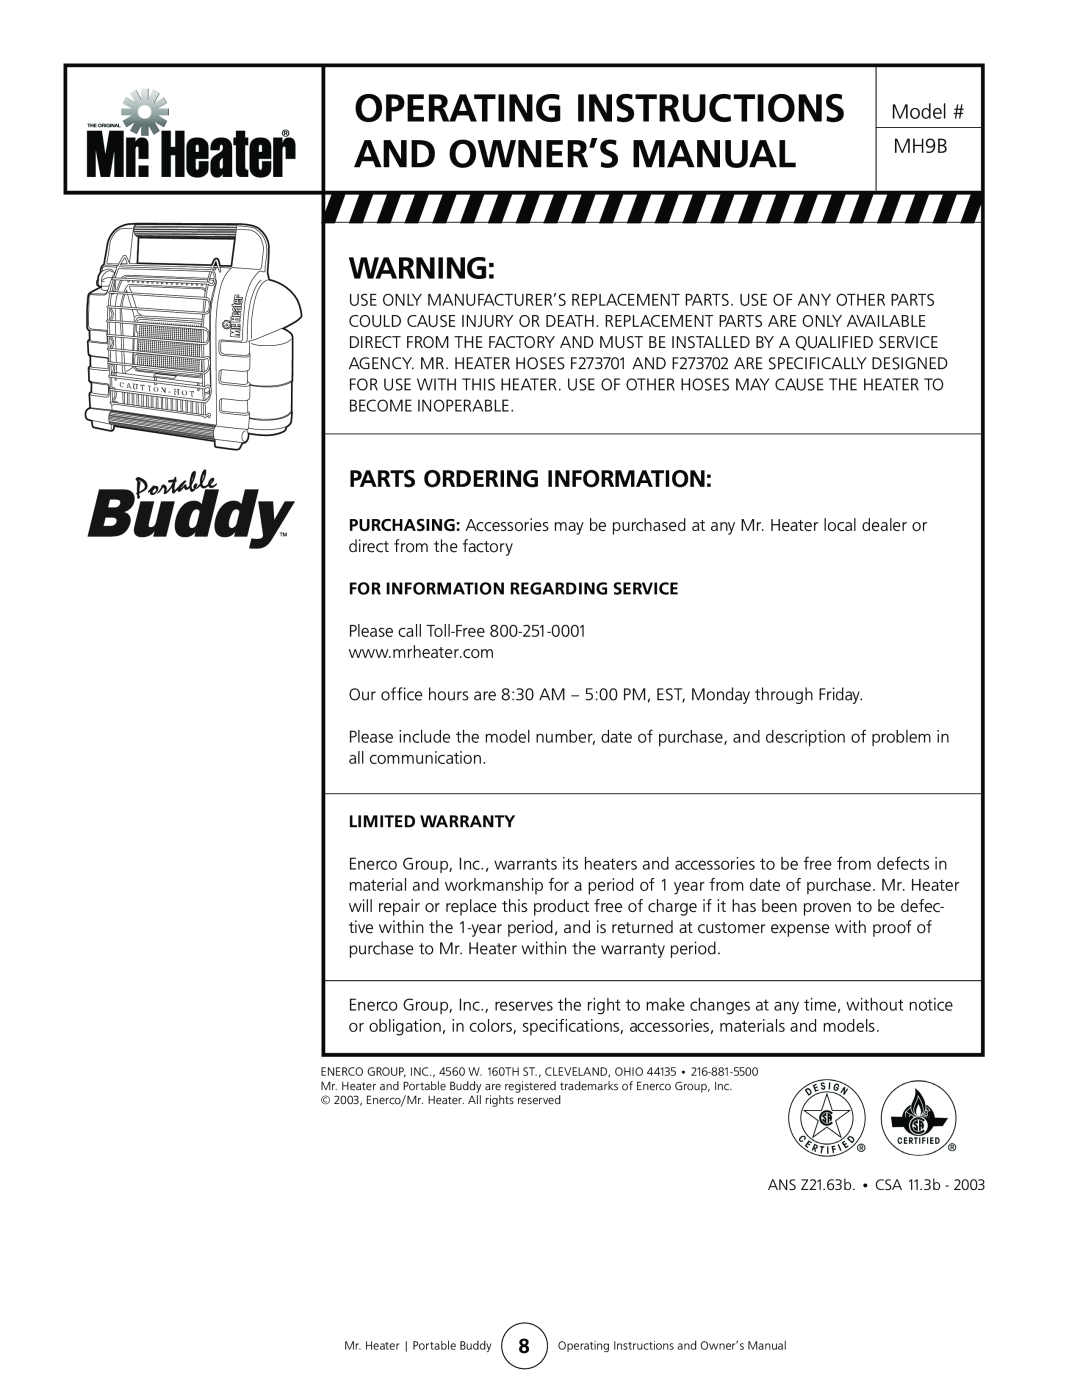 Mr. Heater MH9B owner manual Parts Ordering Information, For Information Regarding Service, Limited Warranty 